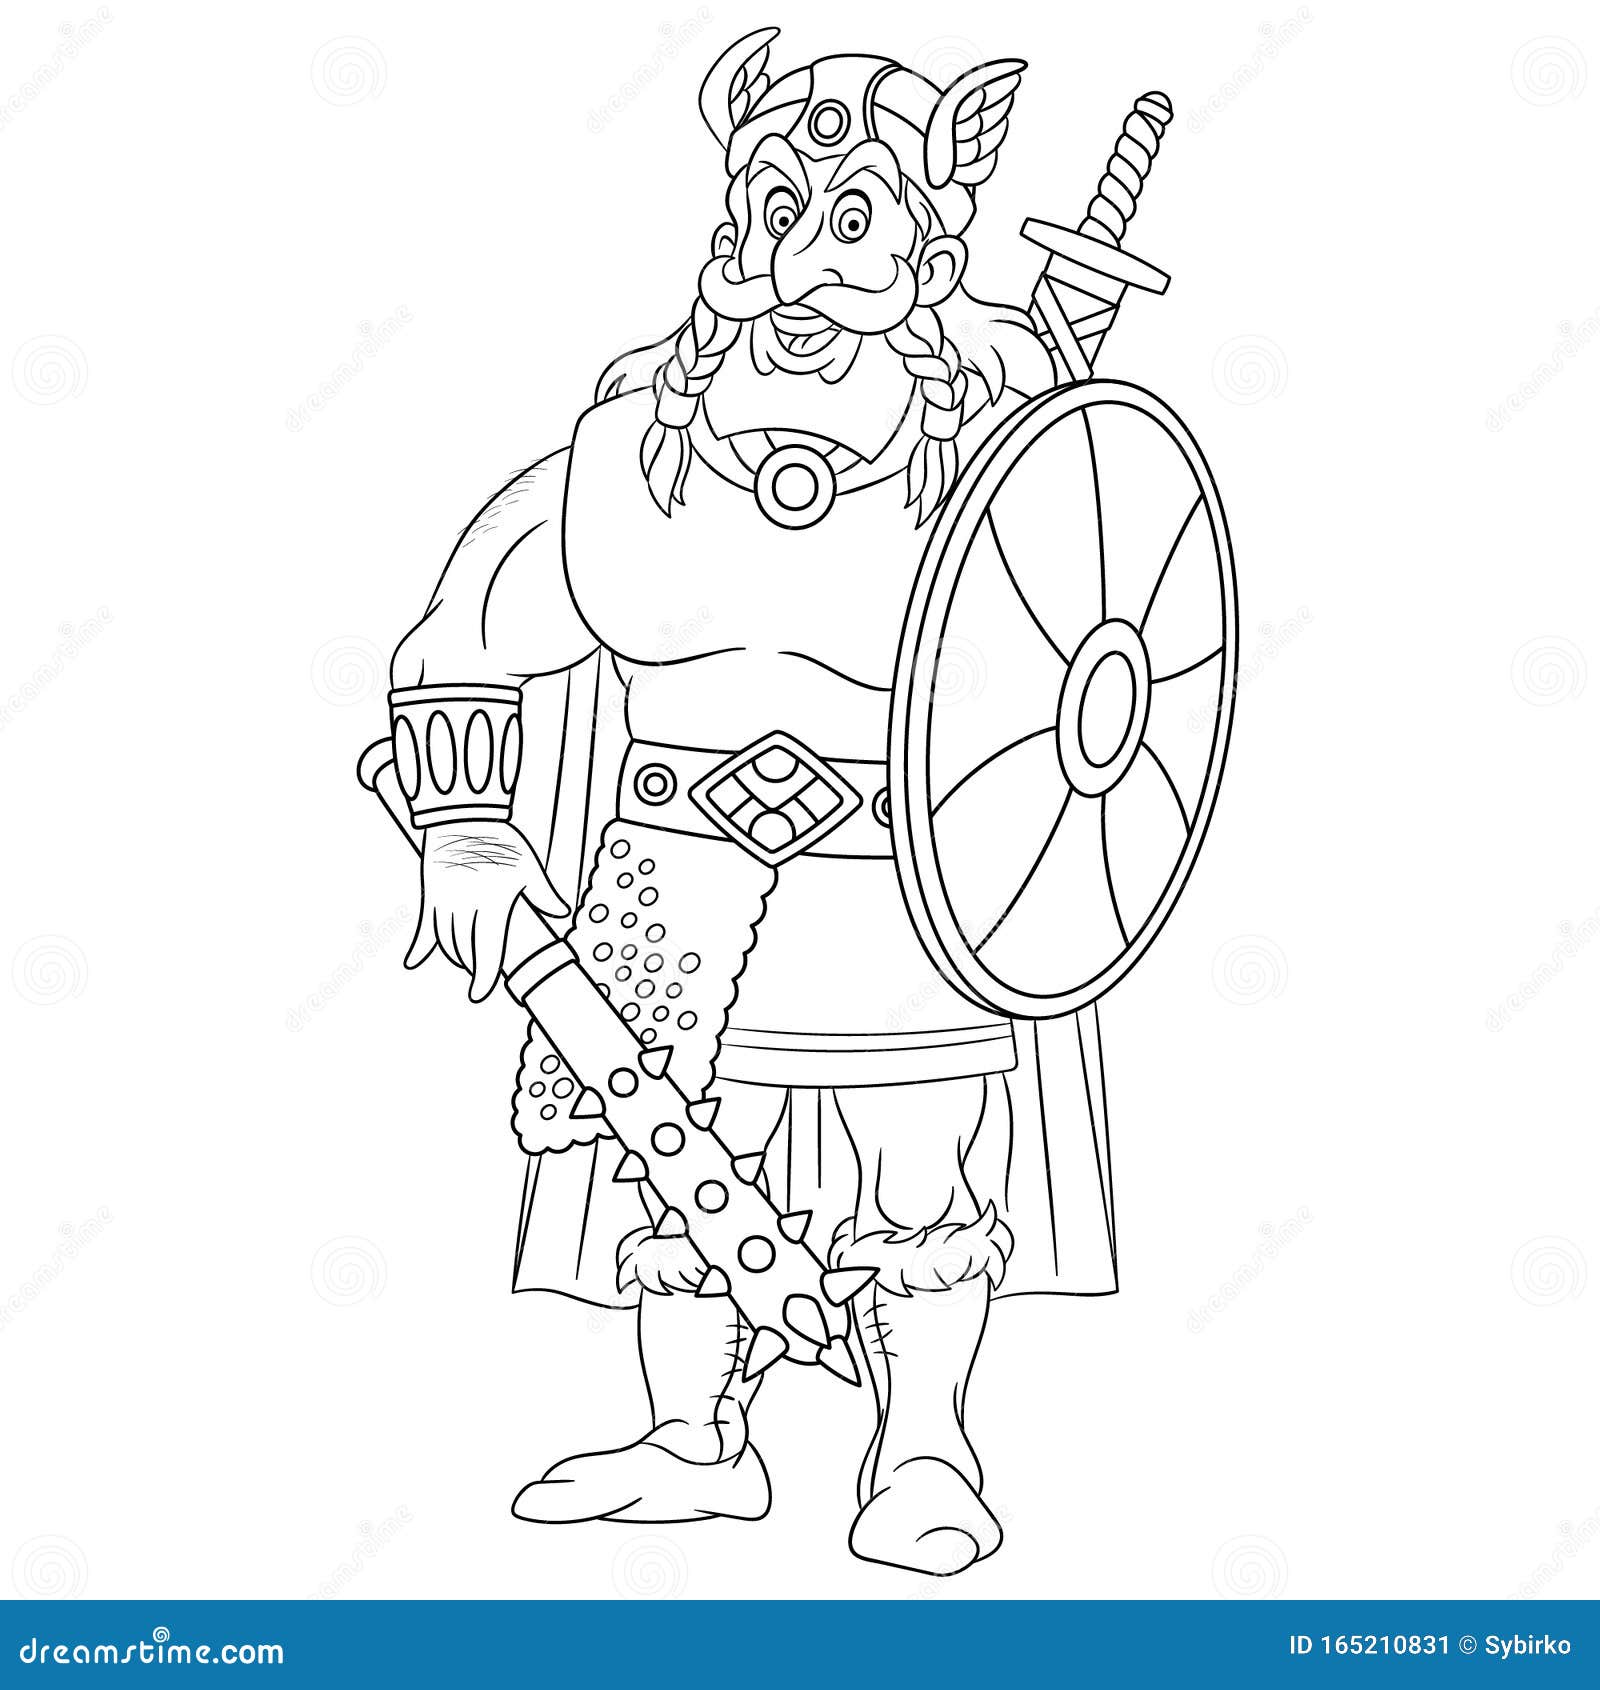 Coloring page with ancient viking warrior stock vector